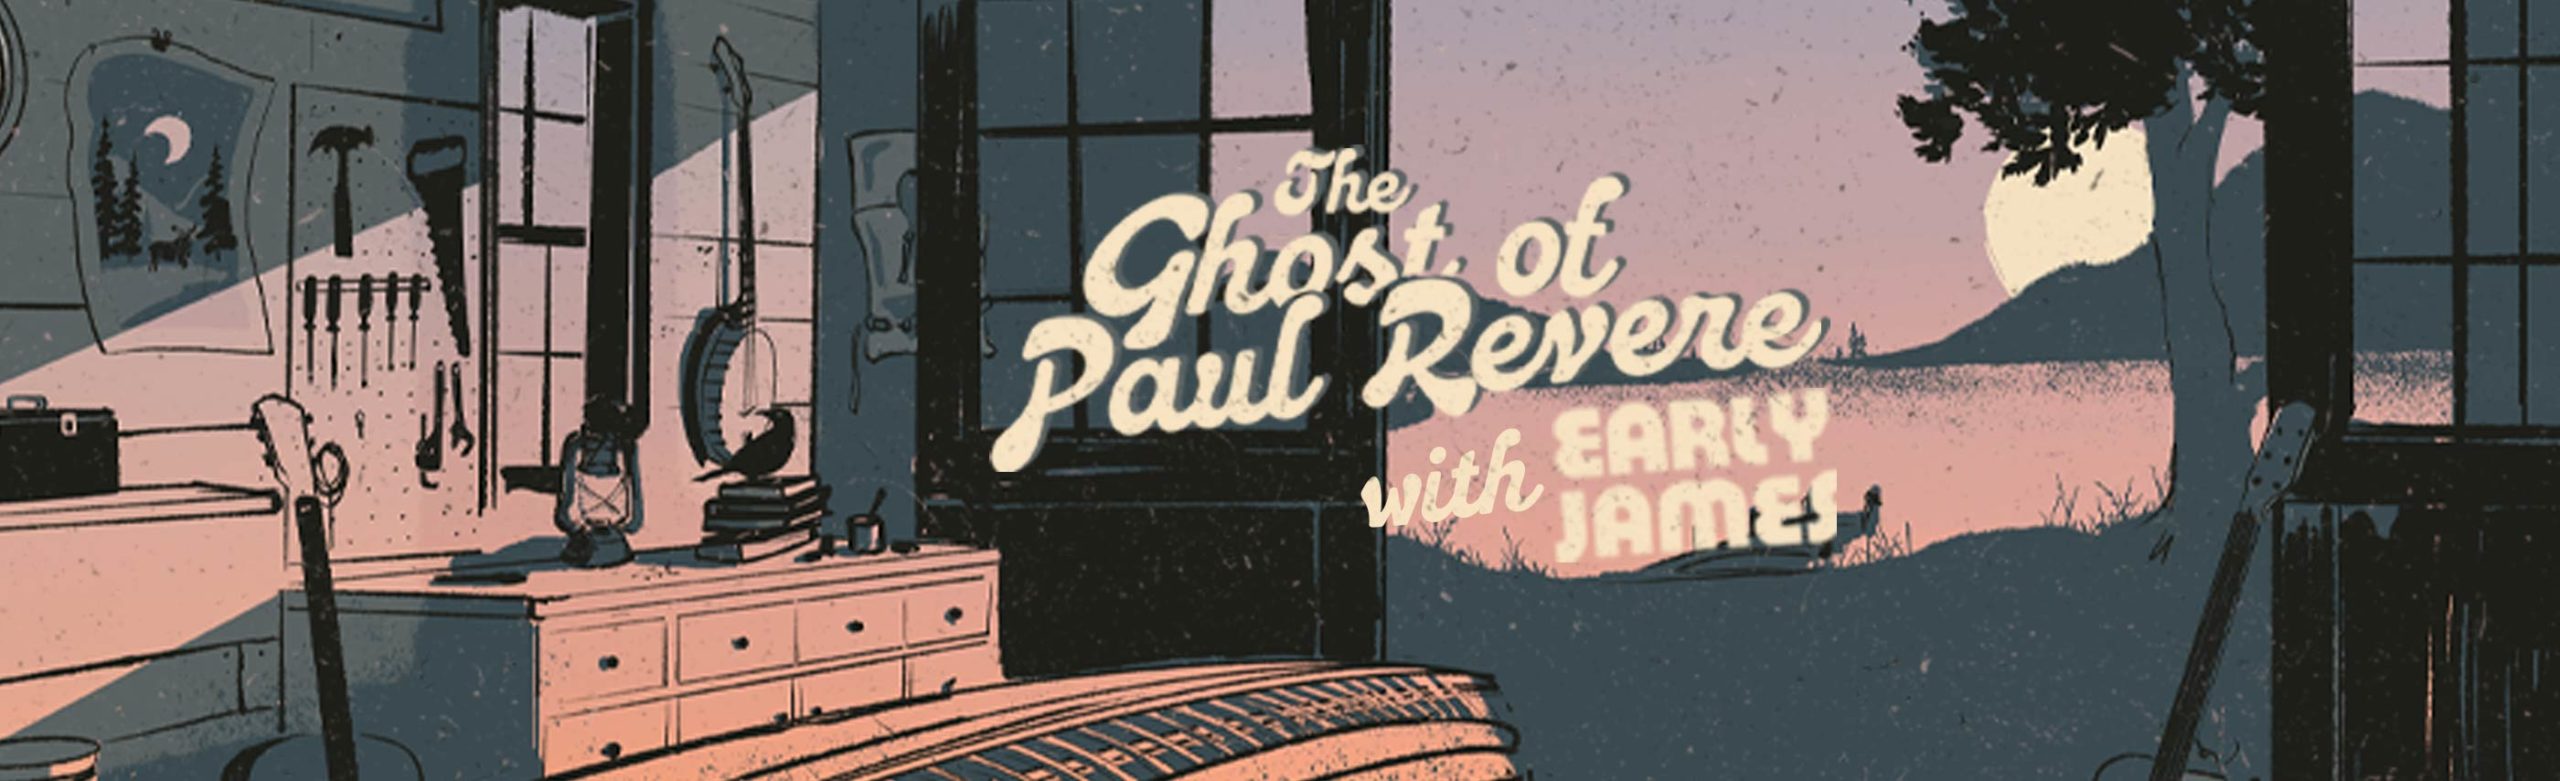 Ghost of Paul Revere Plans Return to Montana for Two Concerts in 2022 Image